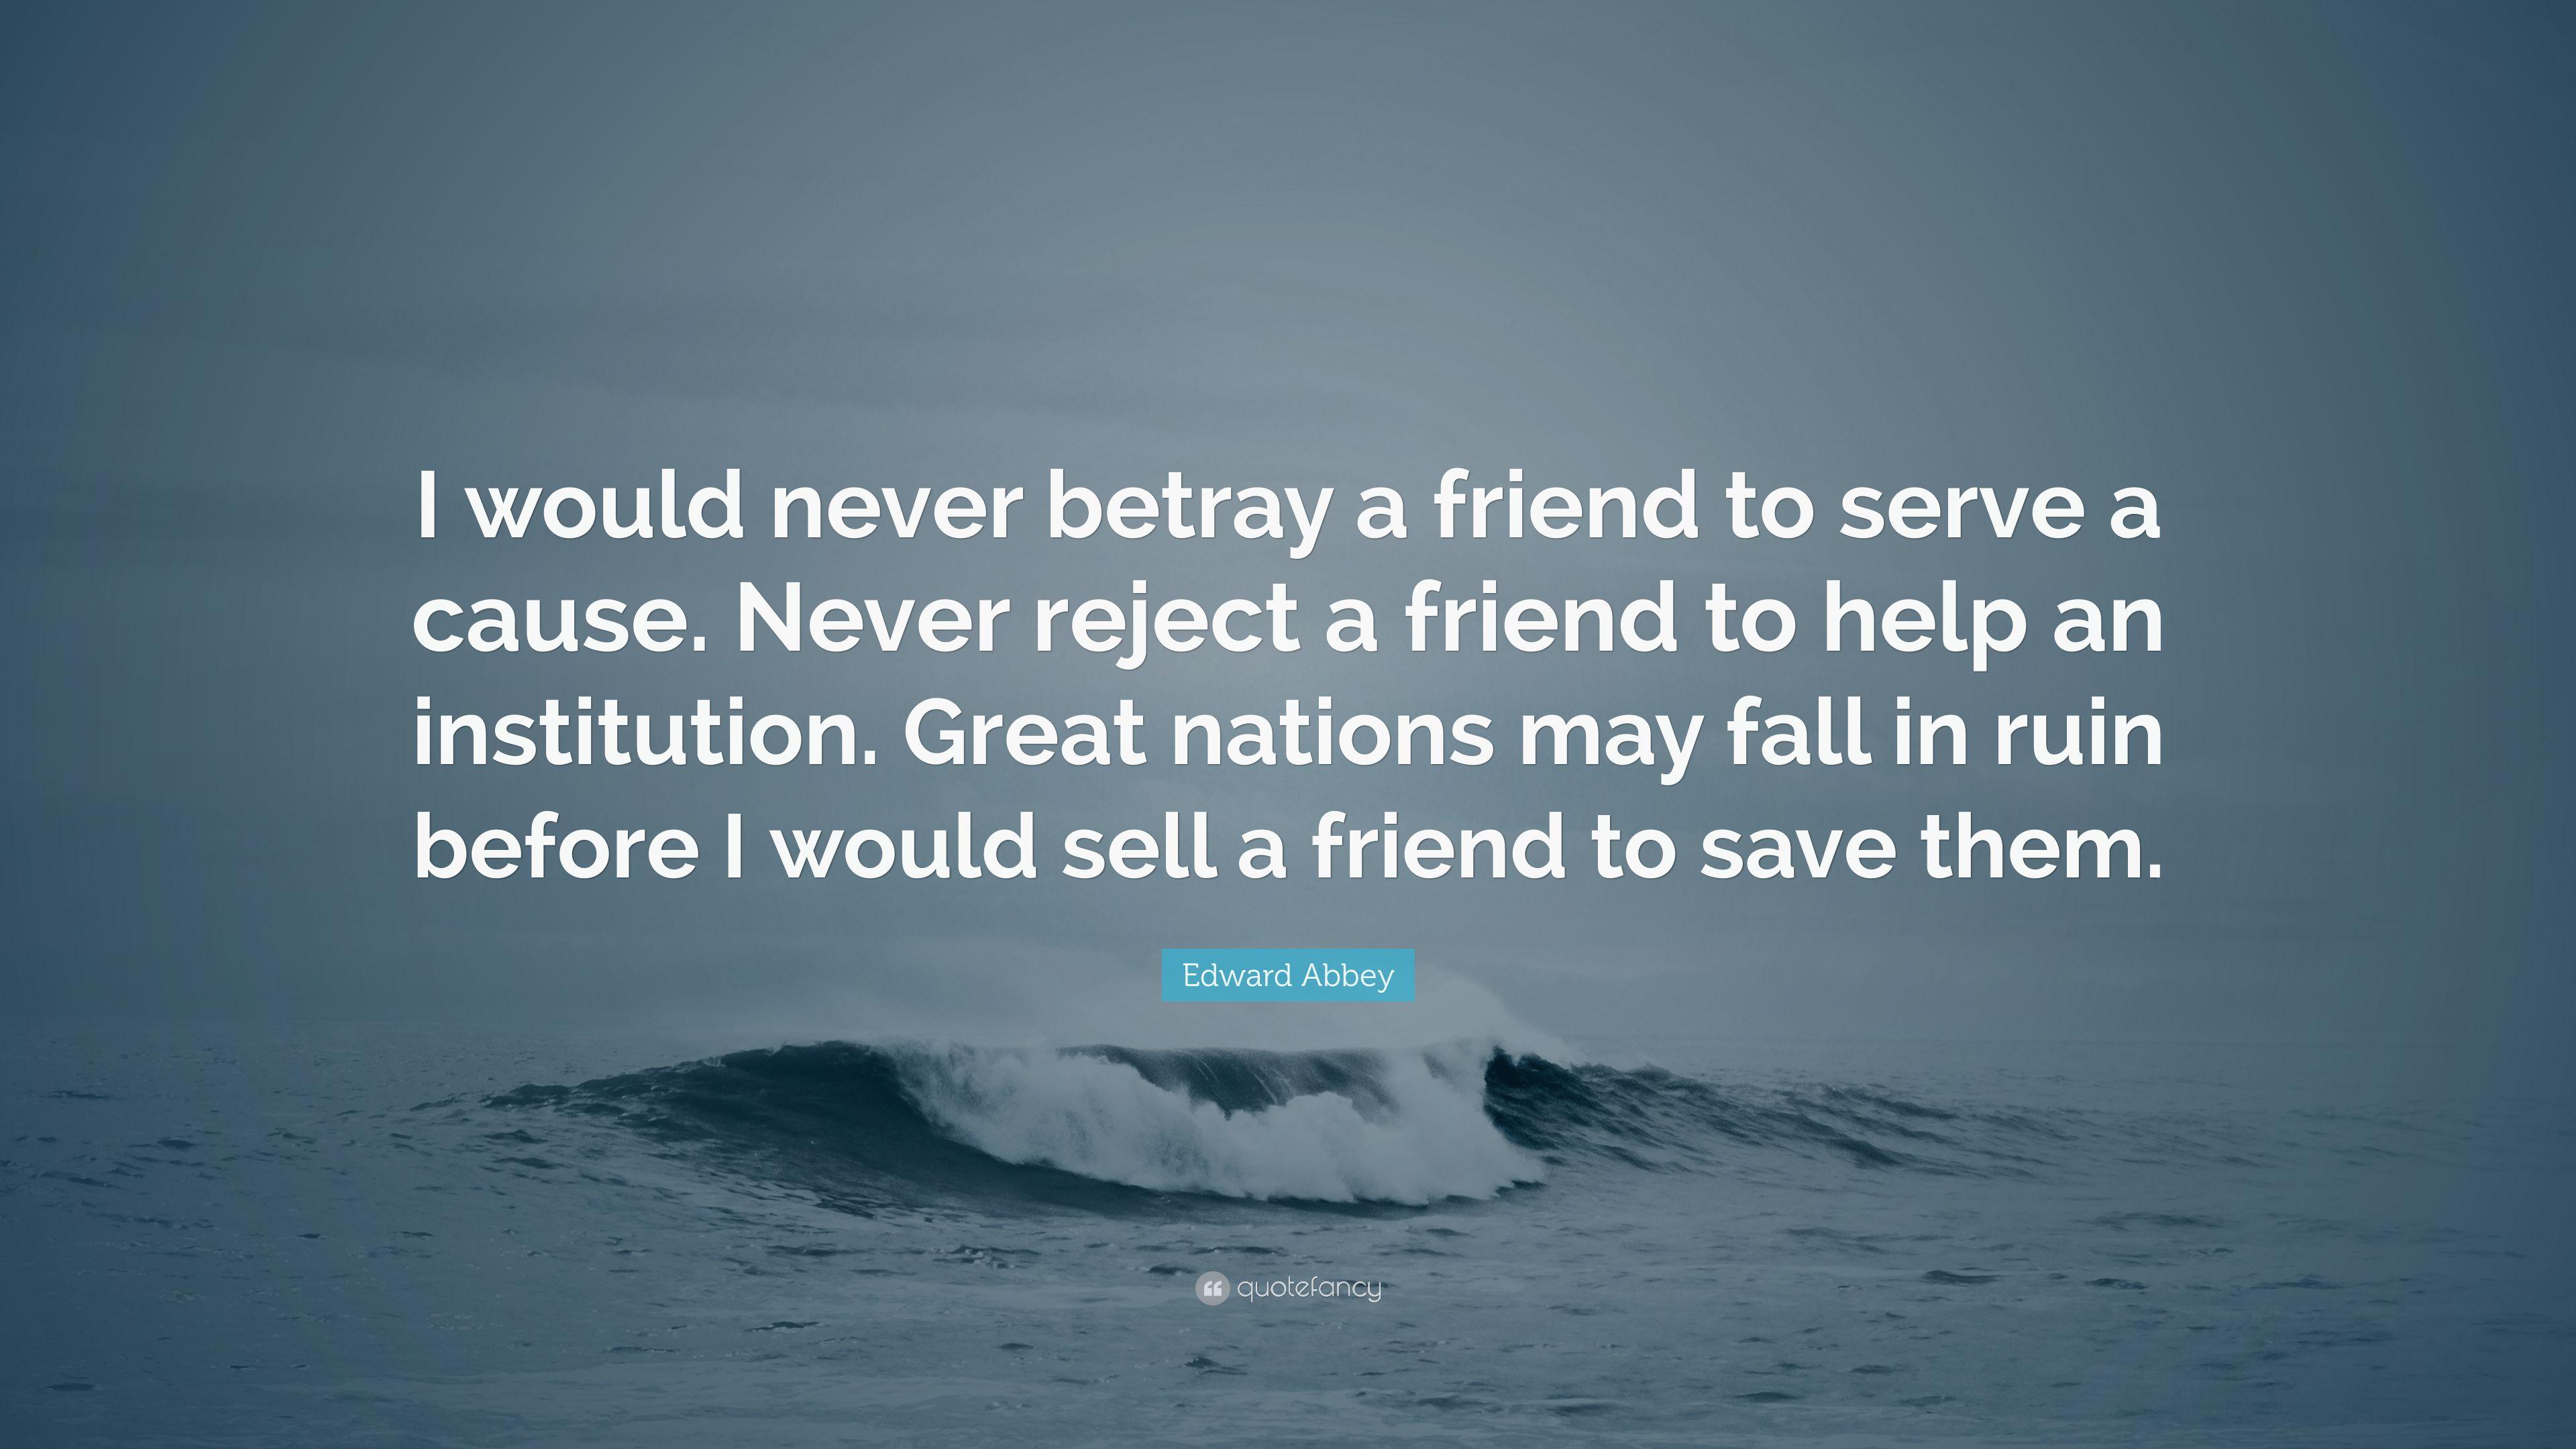 Edward Abbey Quote: “I would never betray a friend to serve a